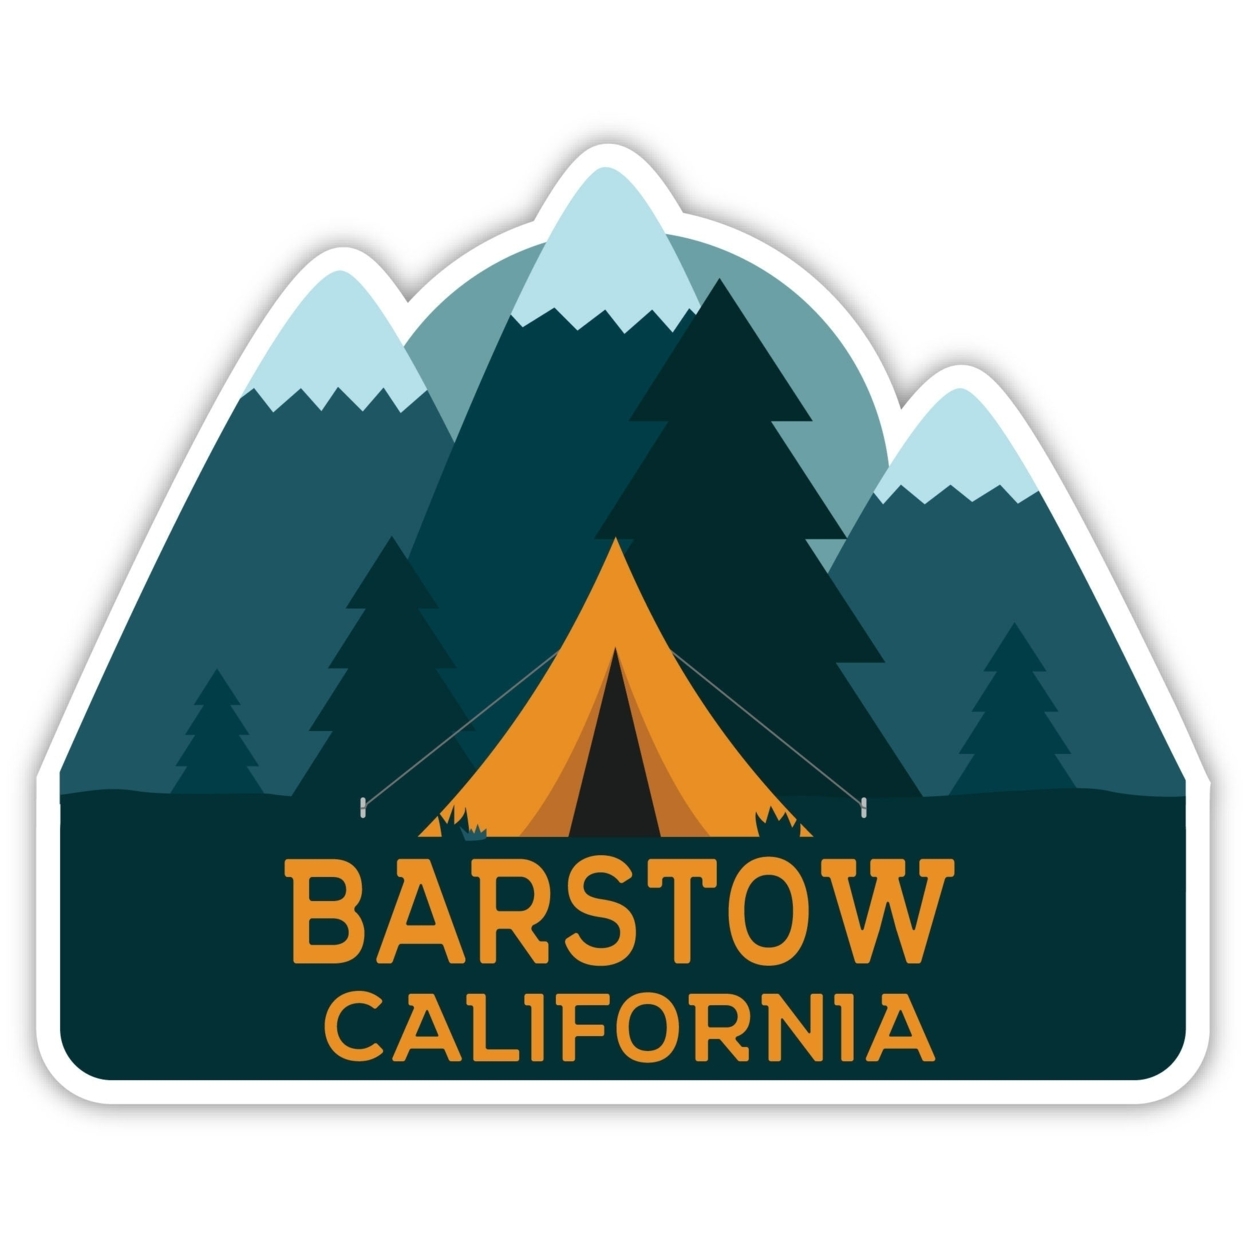 Barstow California Souvenir Decorative Stickers (Choose Theme And Size) - Single Unit, 4-Inch, Camp Life